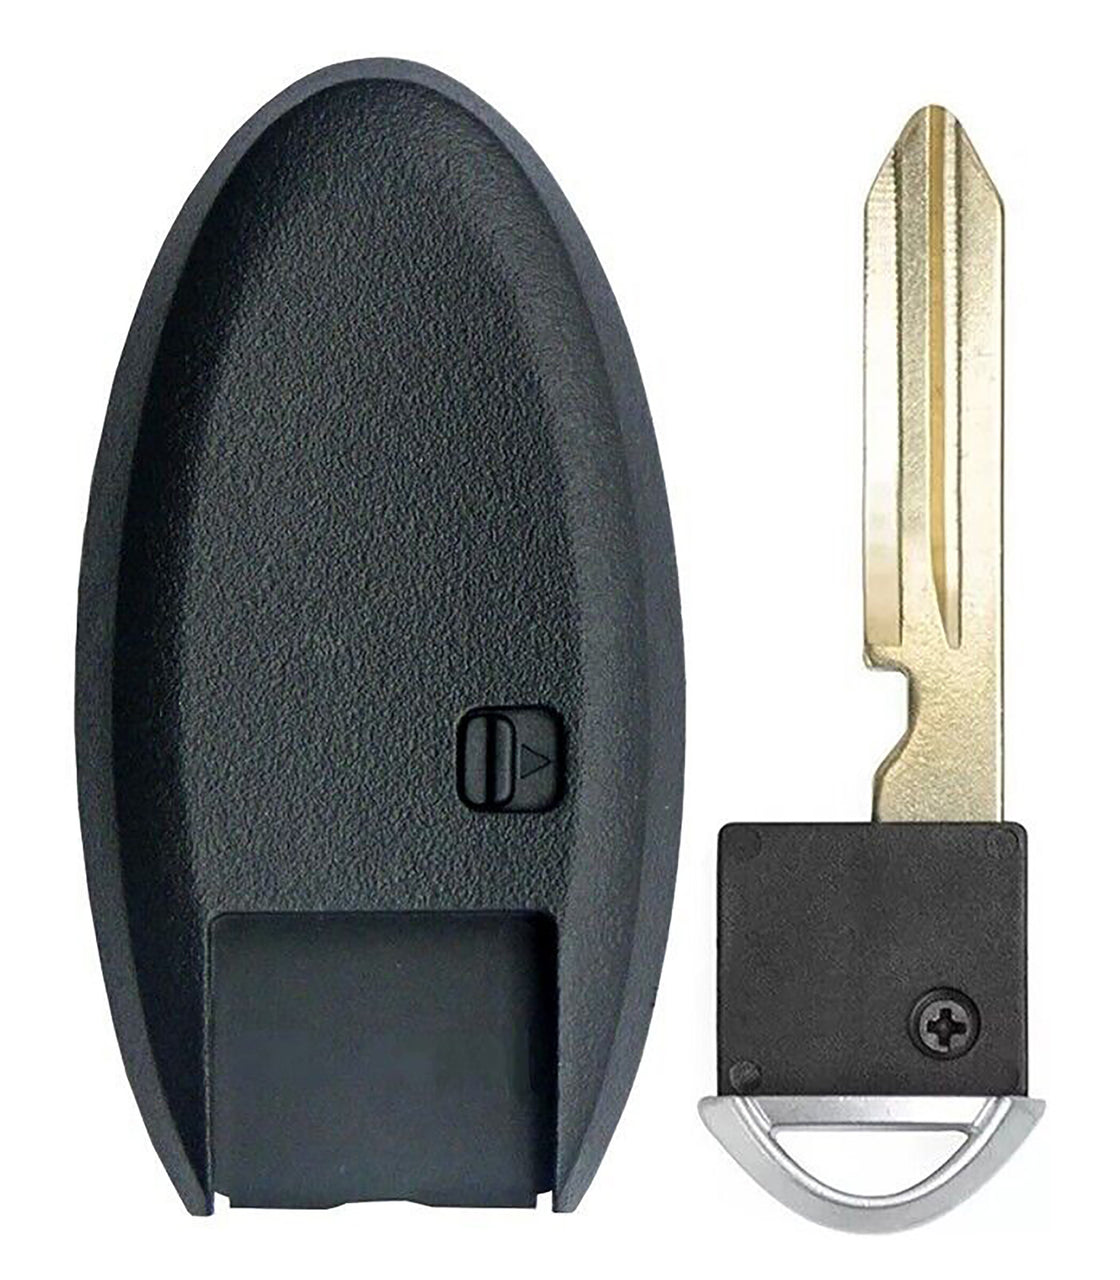 1x New Replacement Proximity Key Fob Compatible with & Fit For Nissan Infiniti Read Description - MPN CWTWBU624-02